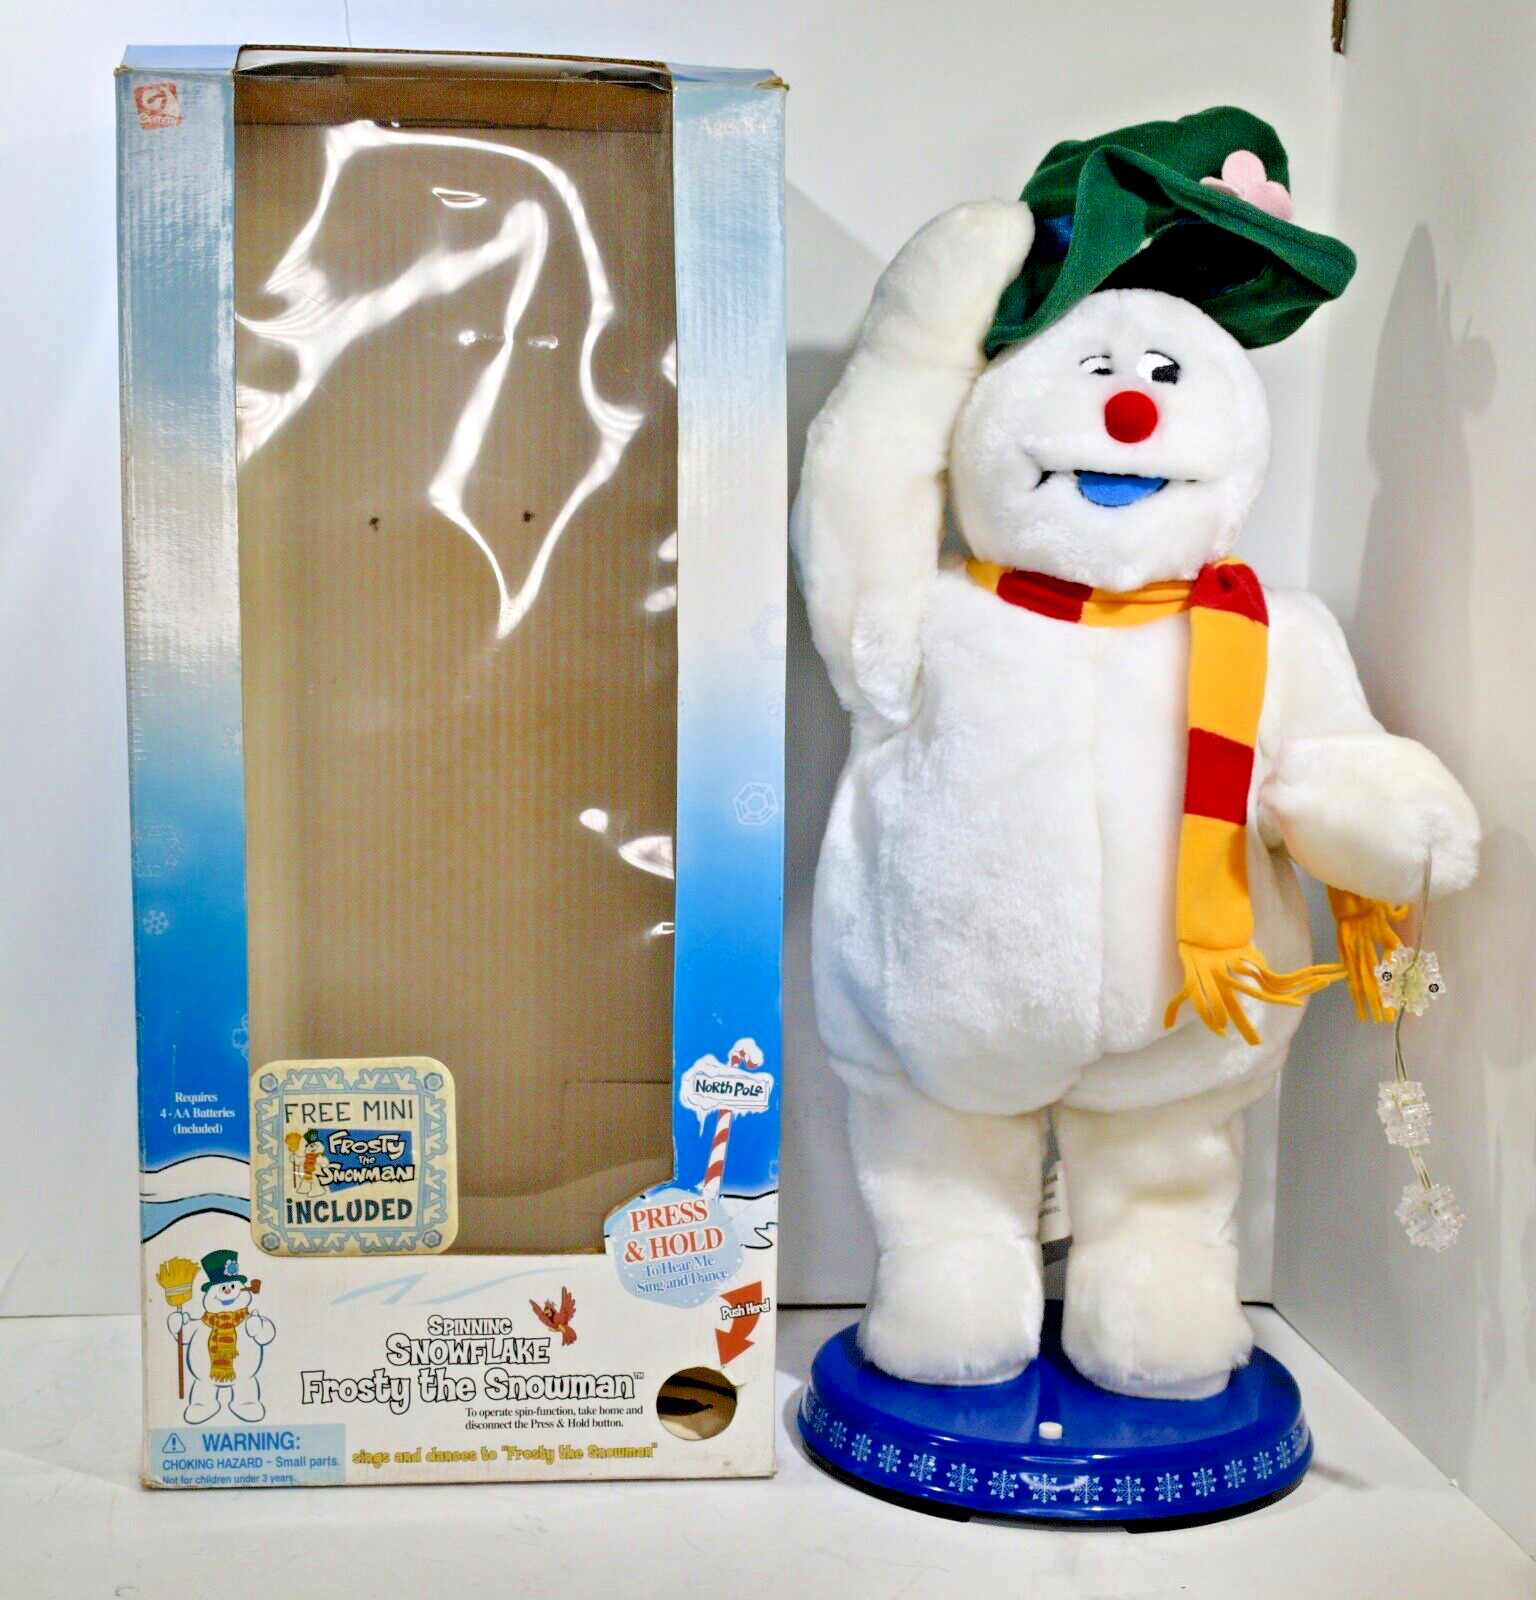 2004 Gemmy Spinning Snowflake Frosty The Snowman Animated Dancing w/ Box WORKS